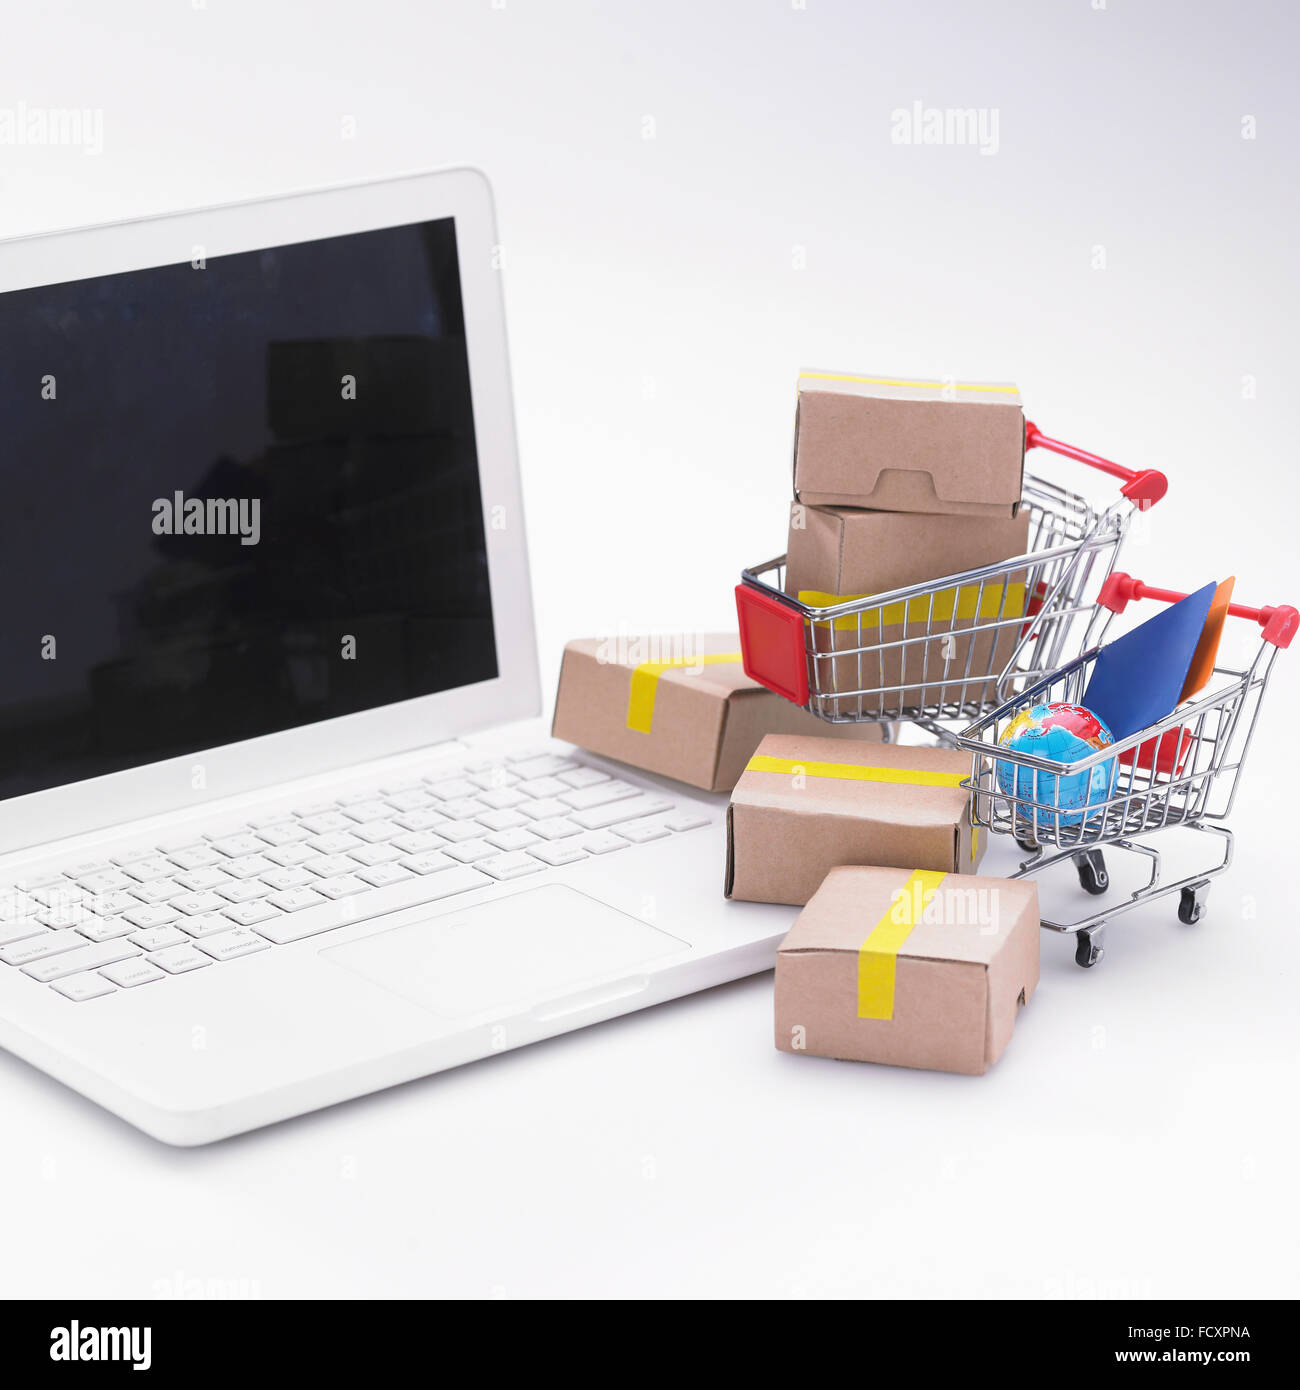 E-commerce or overseas direct purchase Stock Photo